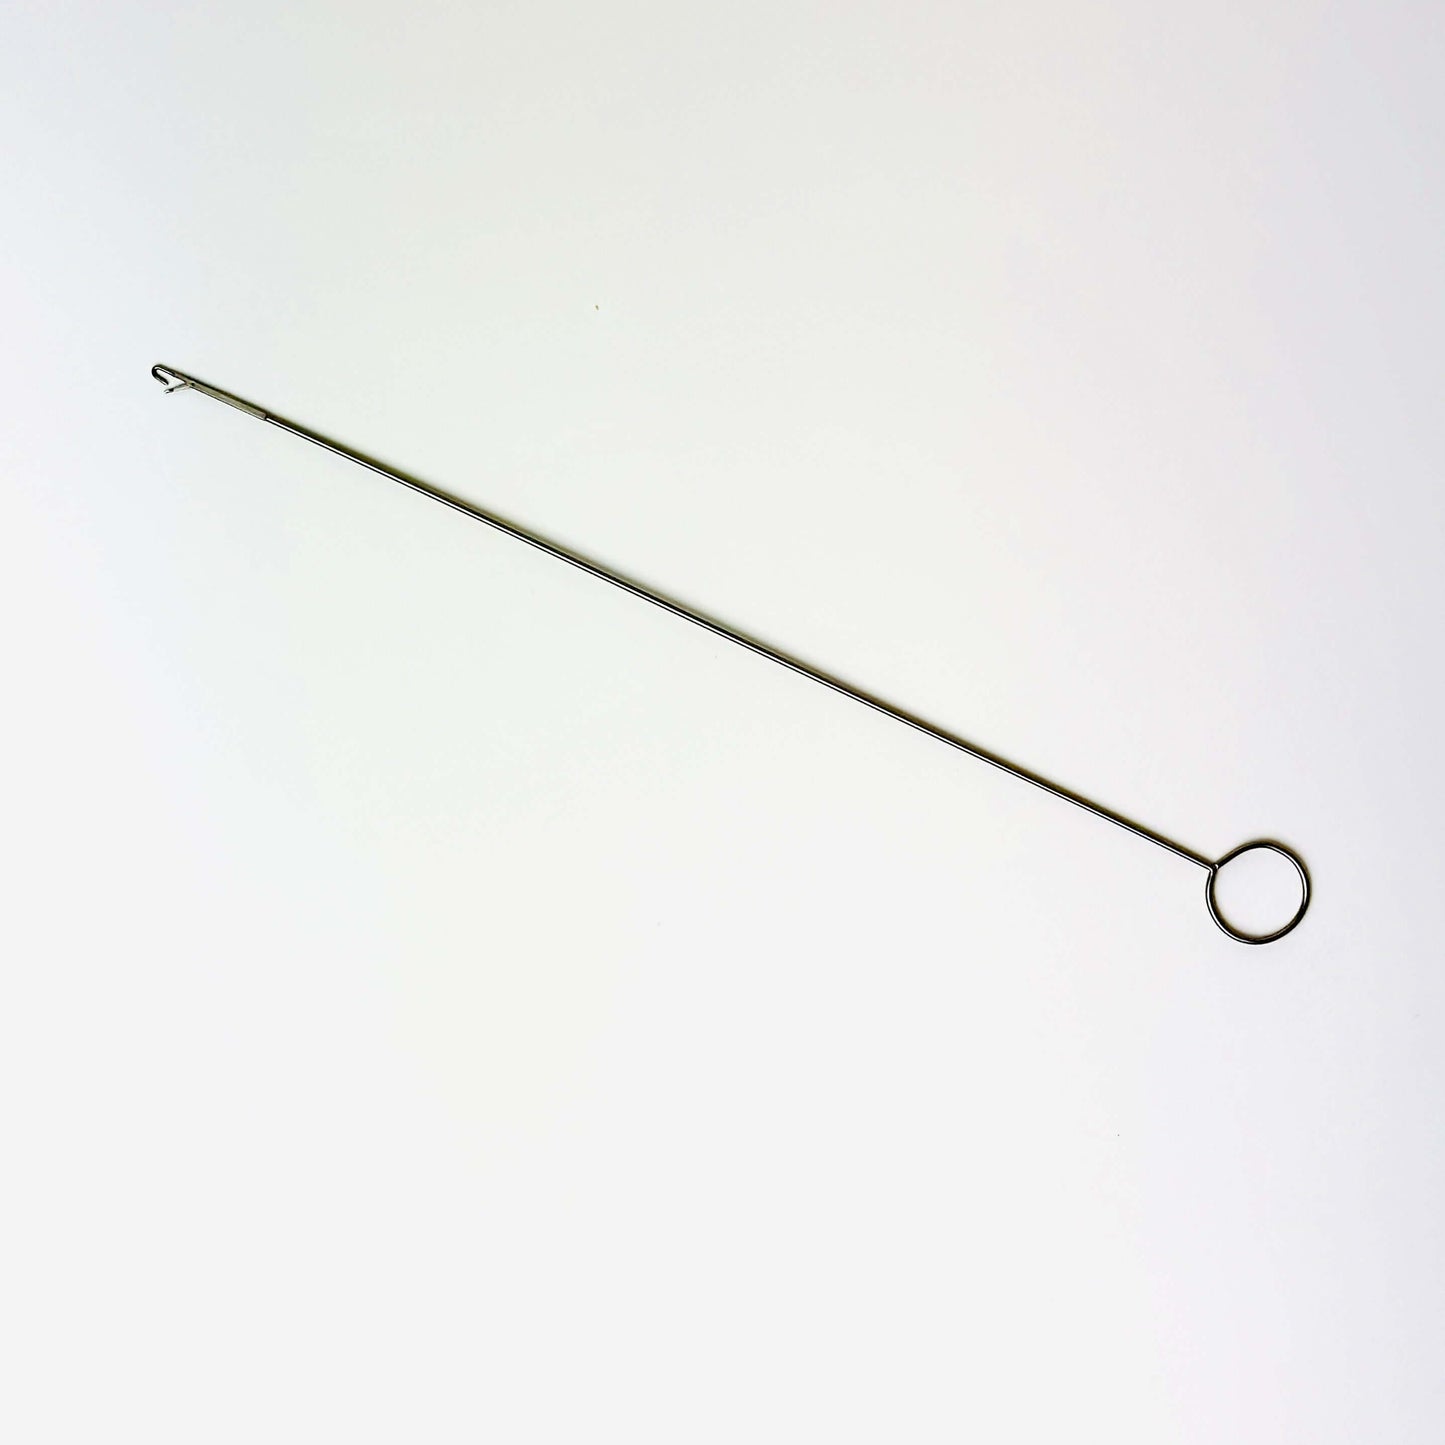 Wick puller tool, wicking tool, threader hook for candle making, 10.4” long pin